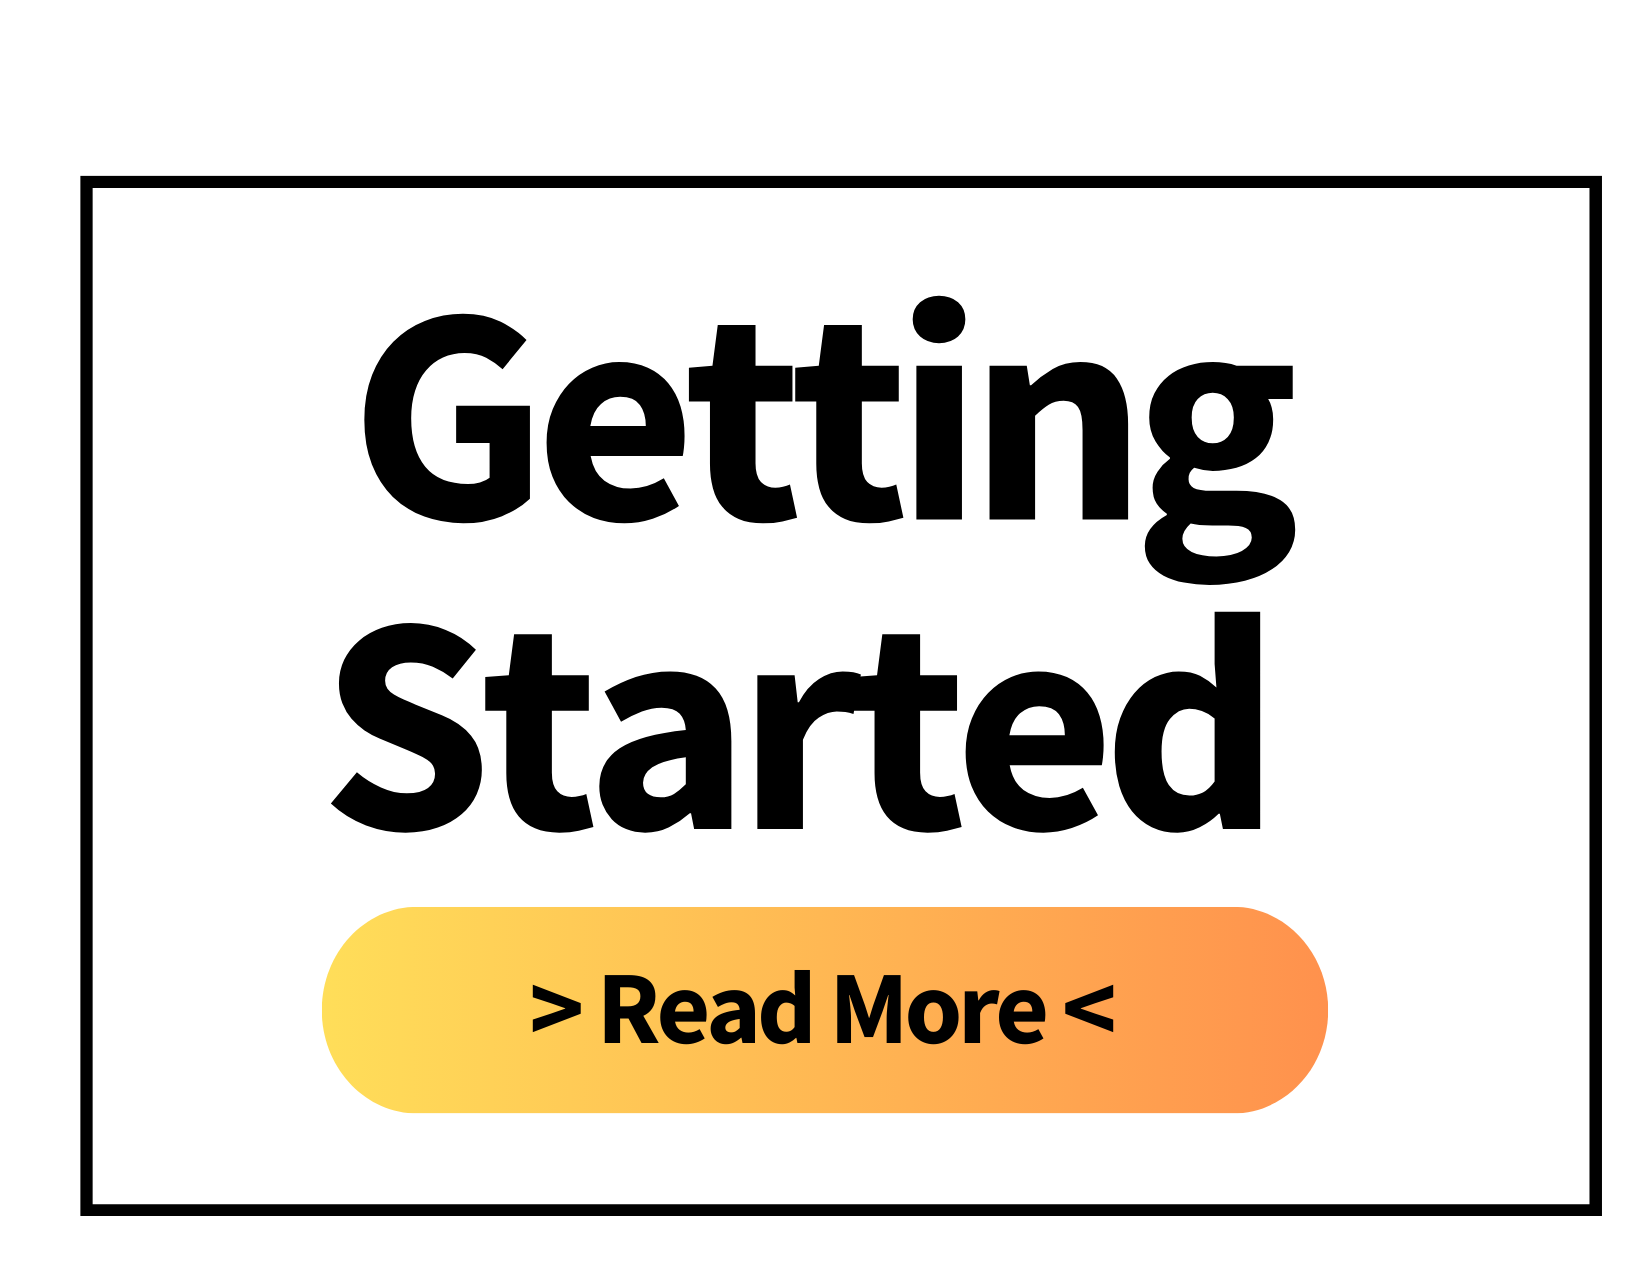 Getting Started: Read More